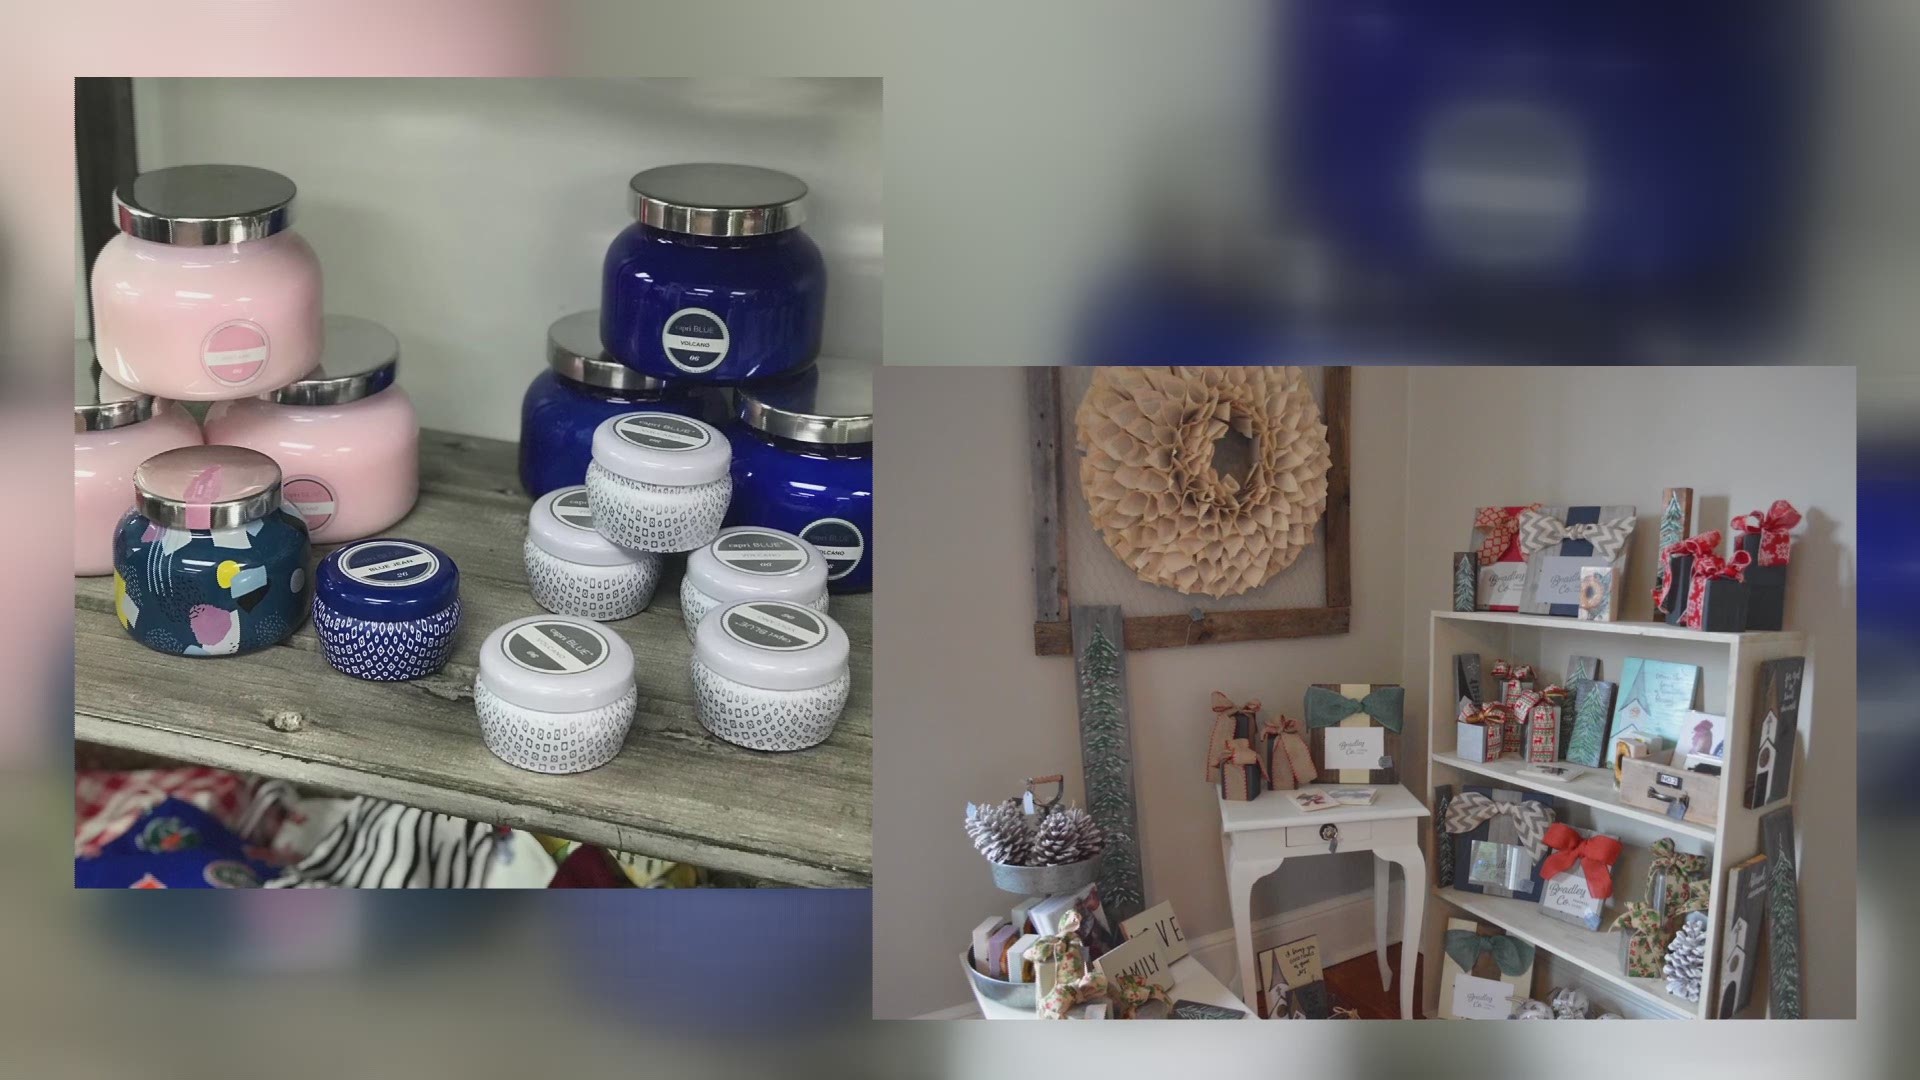 The shop sells locally produced products from more than five local artists and artisans.